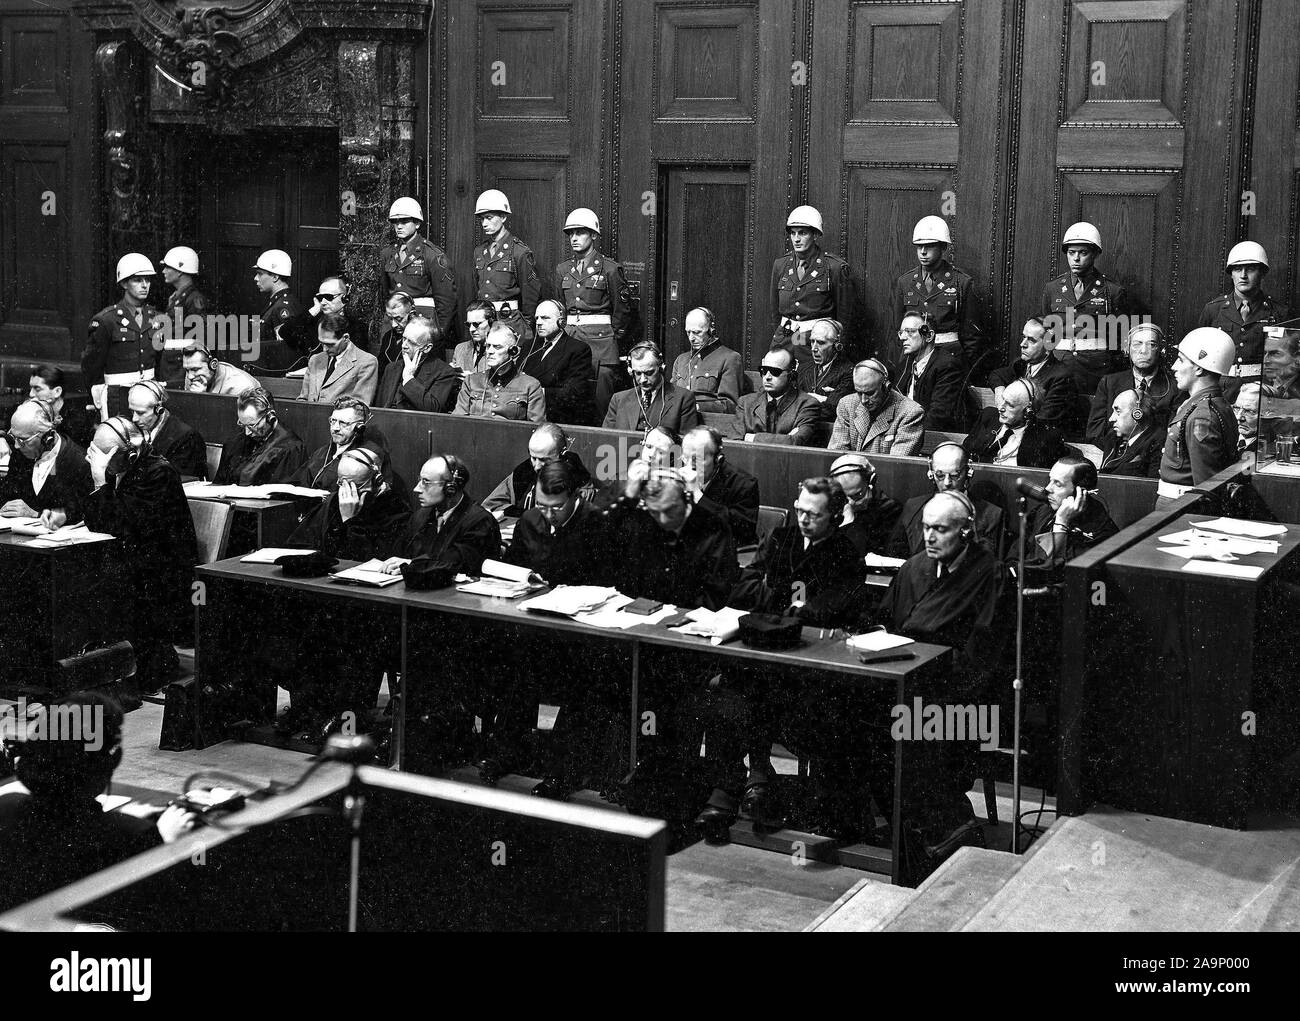 The prosecution charges the defendants with conspiring to destroy the independence of other nations. Goering is in the defendant's box. The defendants, surrounded by American military police, Goering, Hess, Von Ribbentrop, Keiter, Rosenberg, Frank, Frick, Streicher, Funk, Schacht; back row, Donitz, Raeder, Von Schirach, Sauckel, Jodl, Von Papen, Seyss-Inquart, Speer, Von Neurath, and Hans Fritsche. 11/23/45. Stock Photo